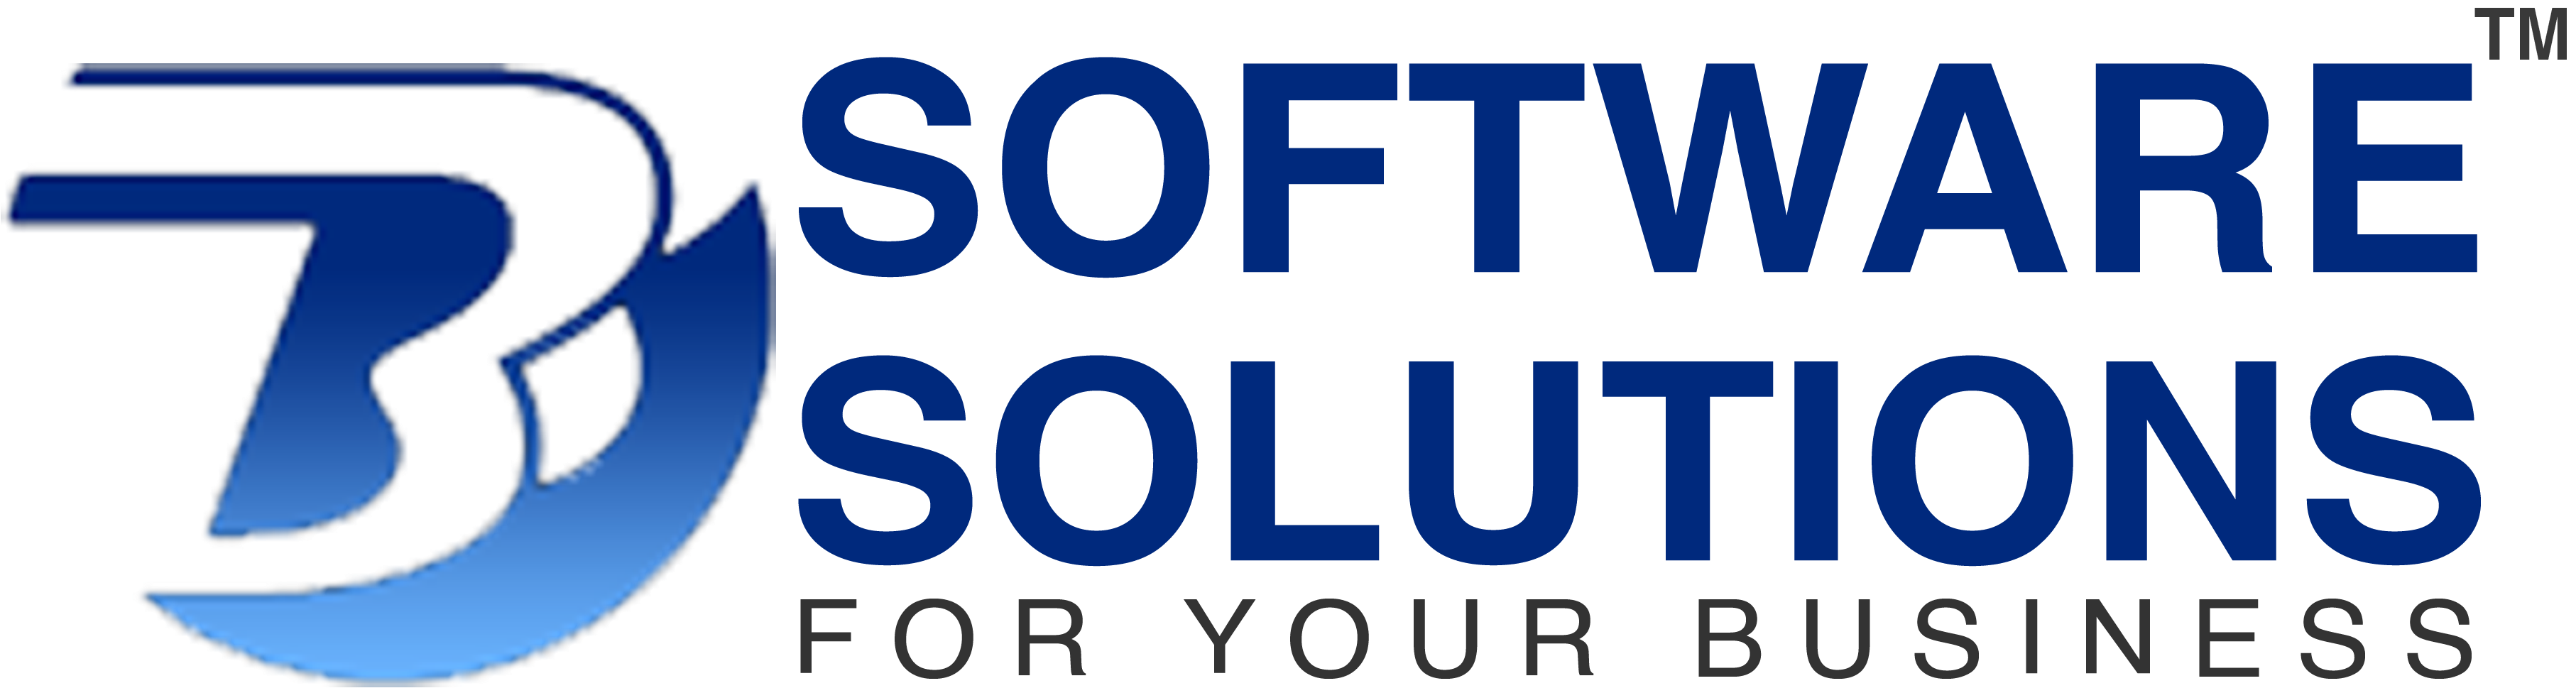 Business Boost Software Solutions